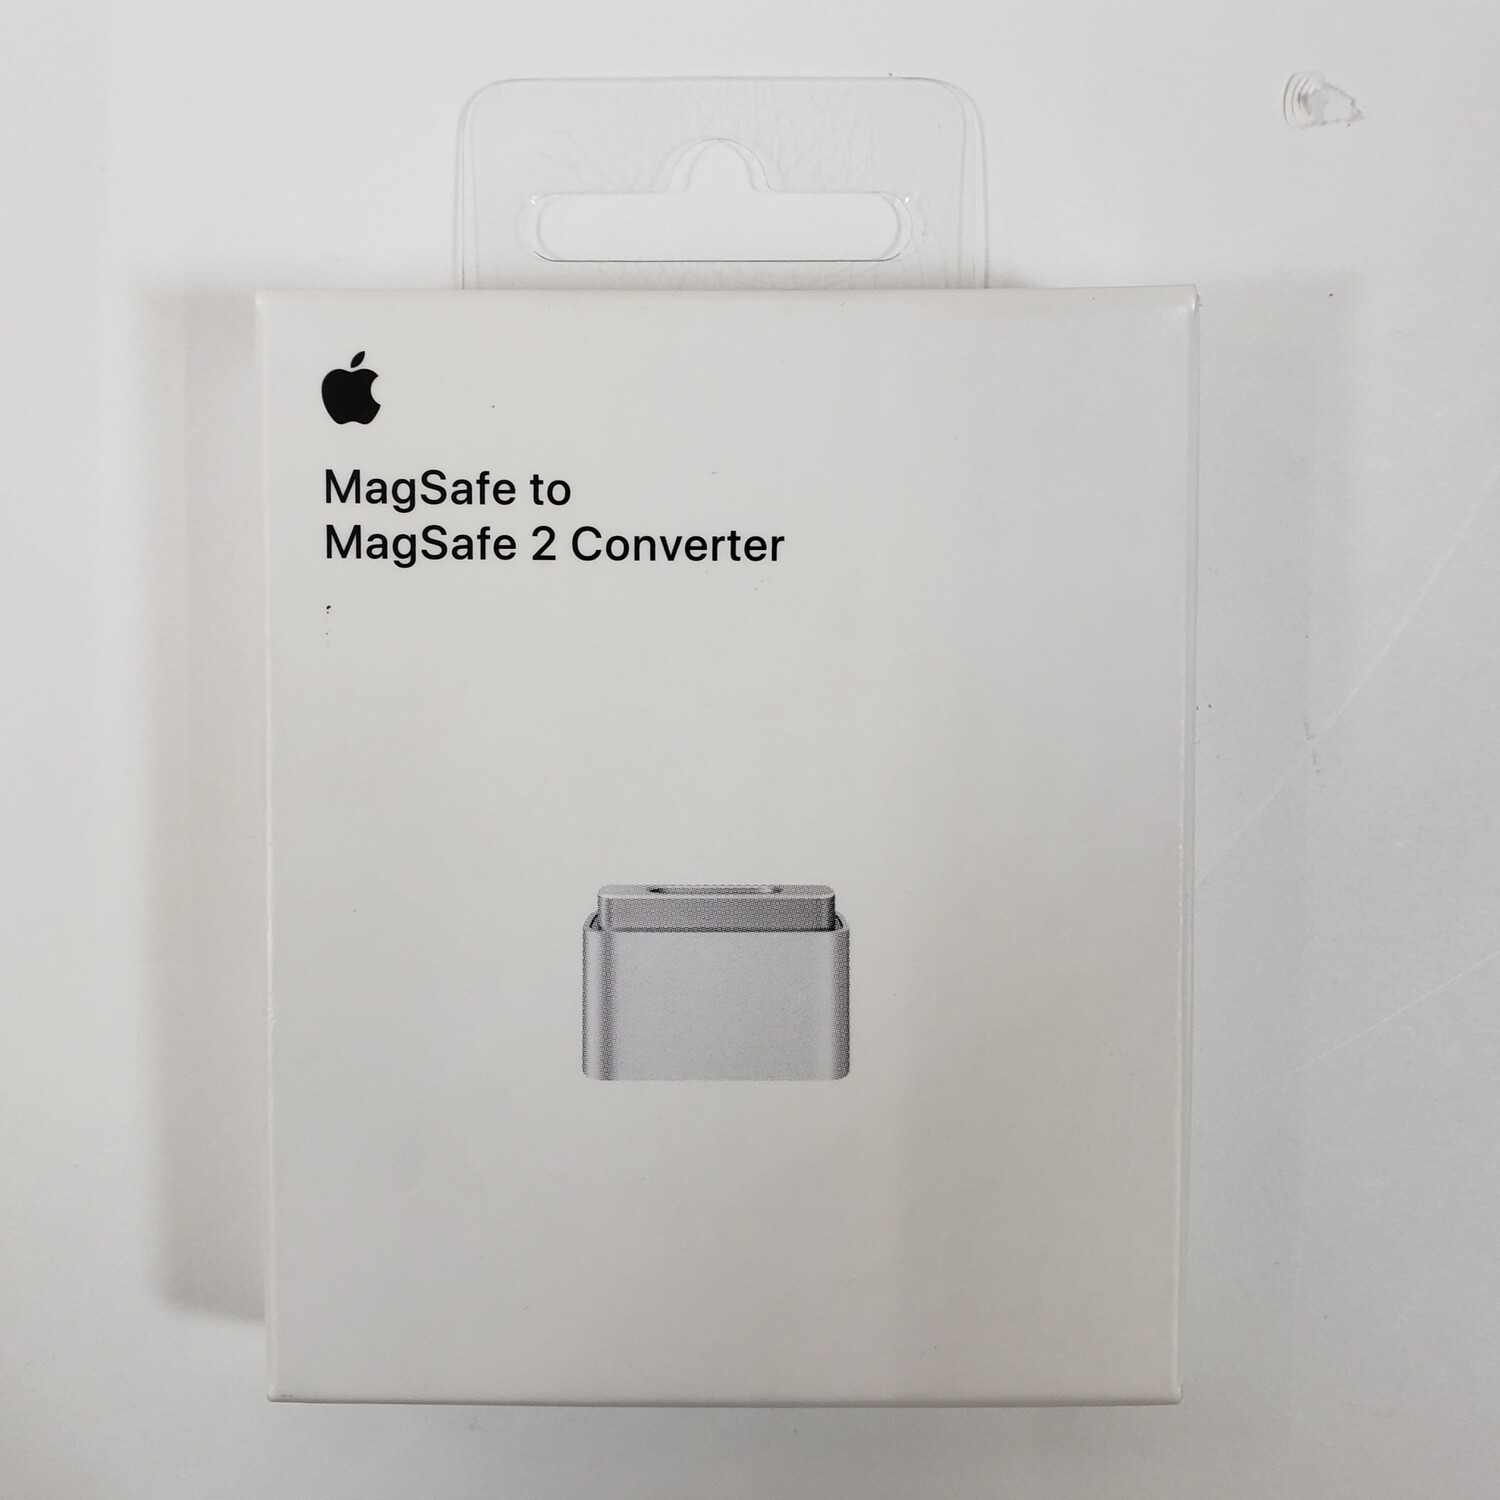 Apple A1464 MagSafe to MagSafe 2 Converter MD504LL/A - New